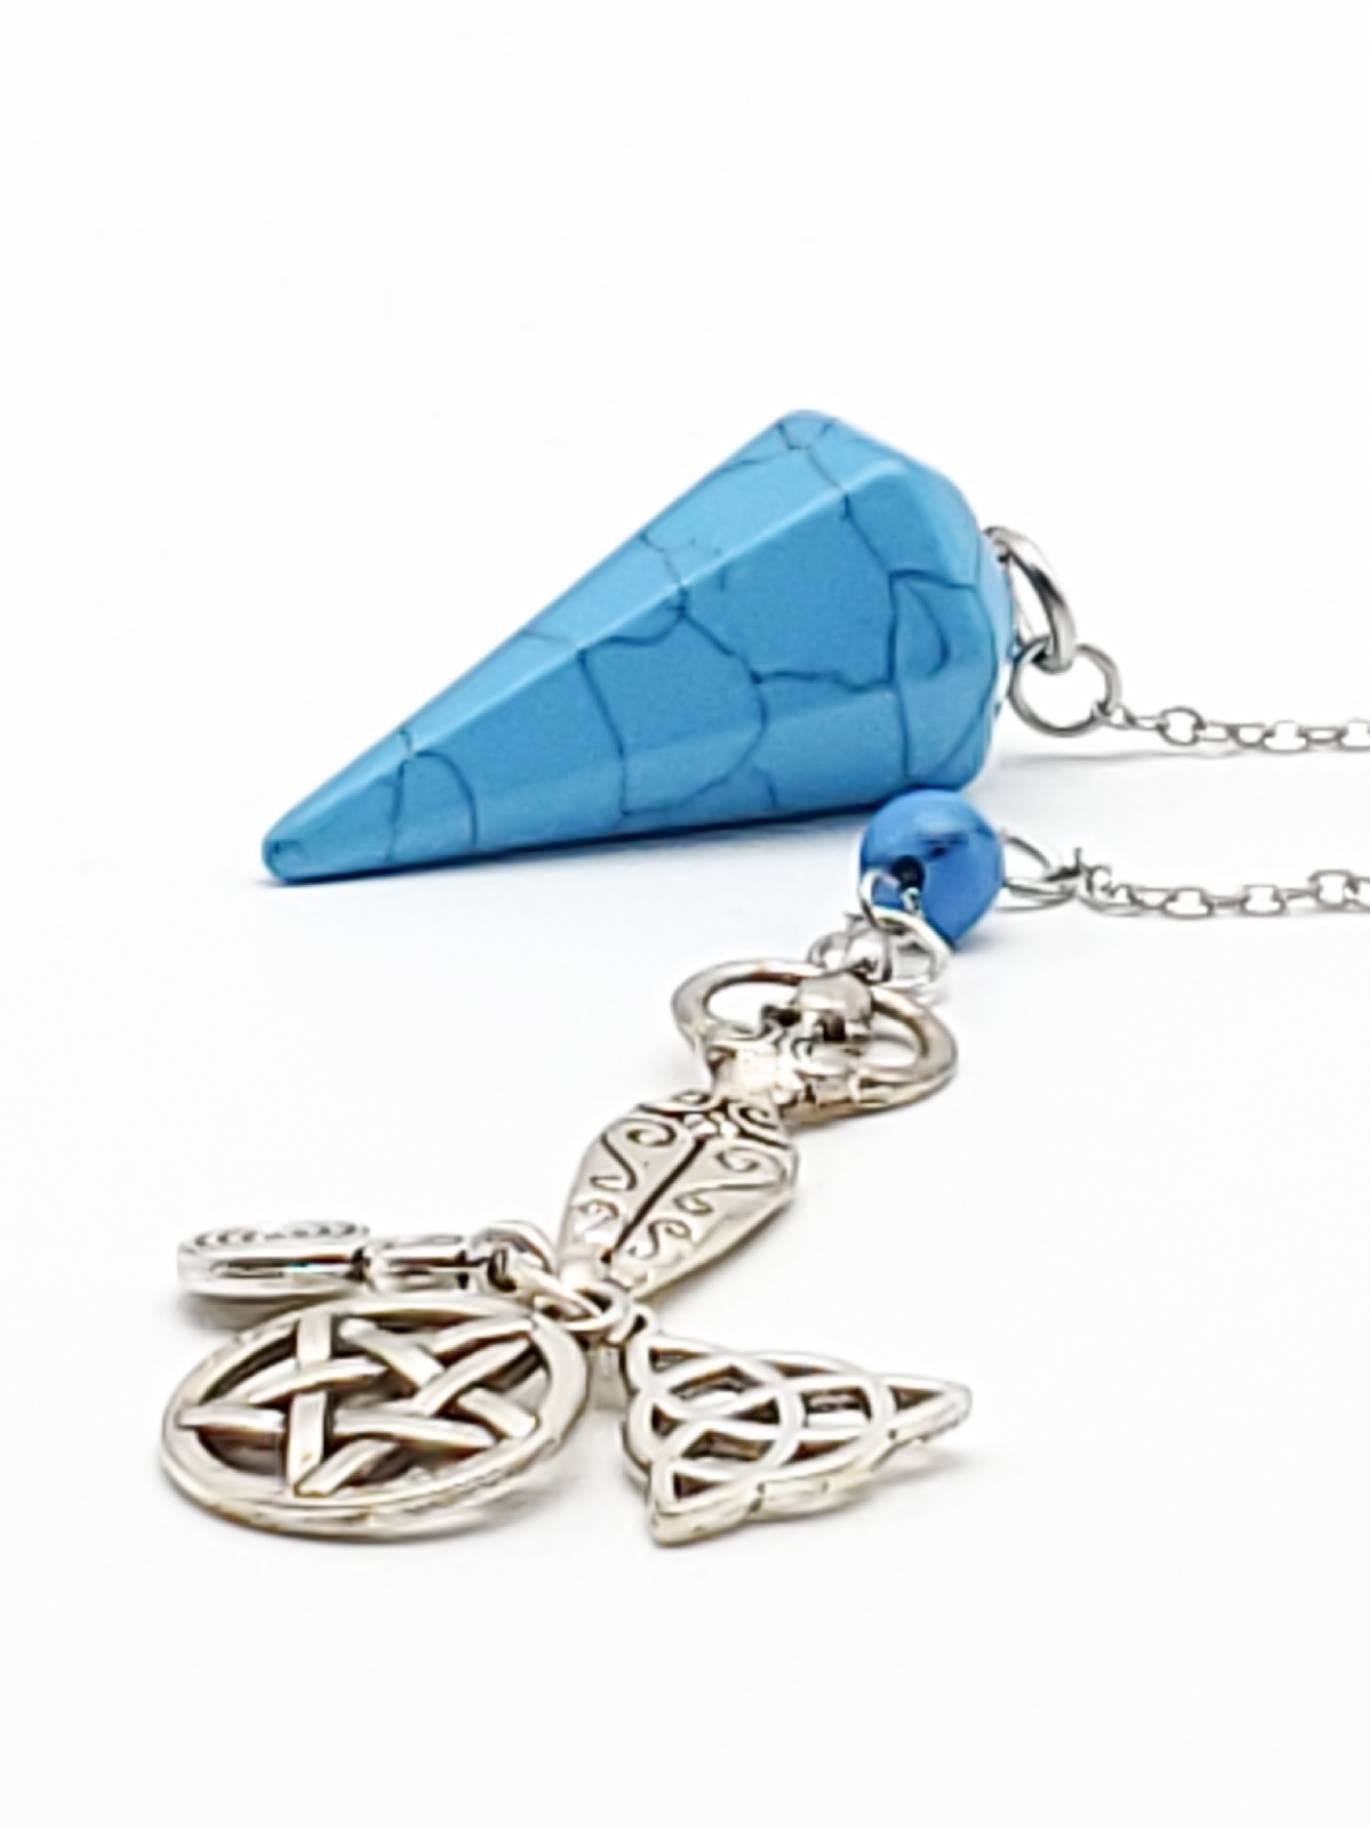 Turquoise Pendulum with Goddess, Celtic Spiral, Triquera, and Pentacle Charms - The Caffeinated Raven